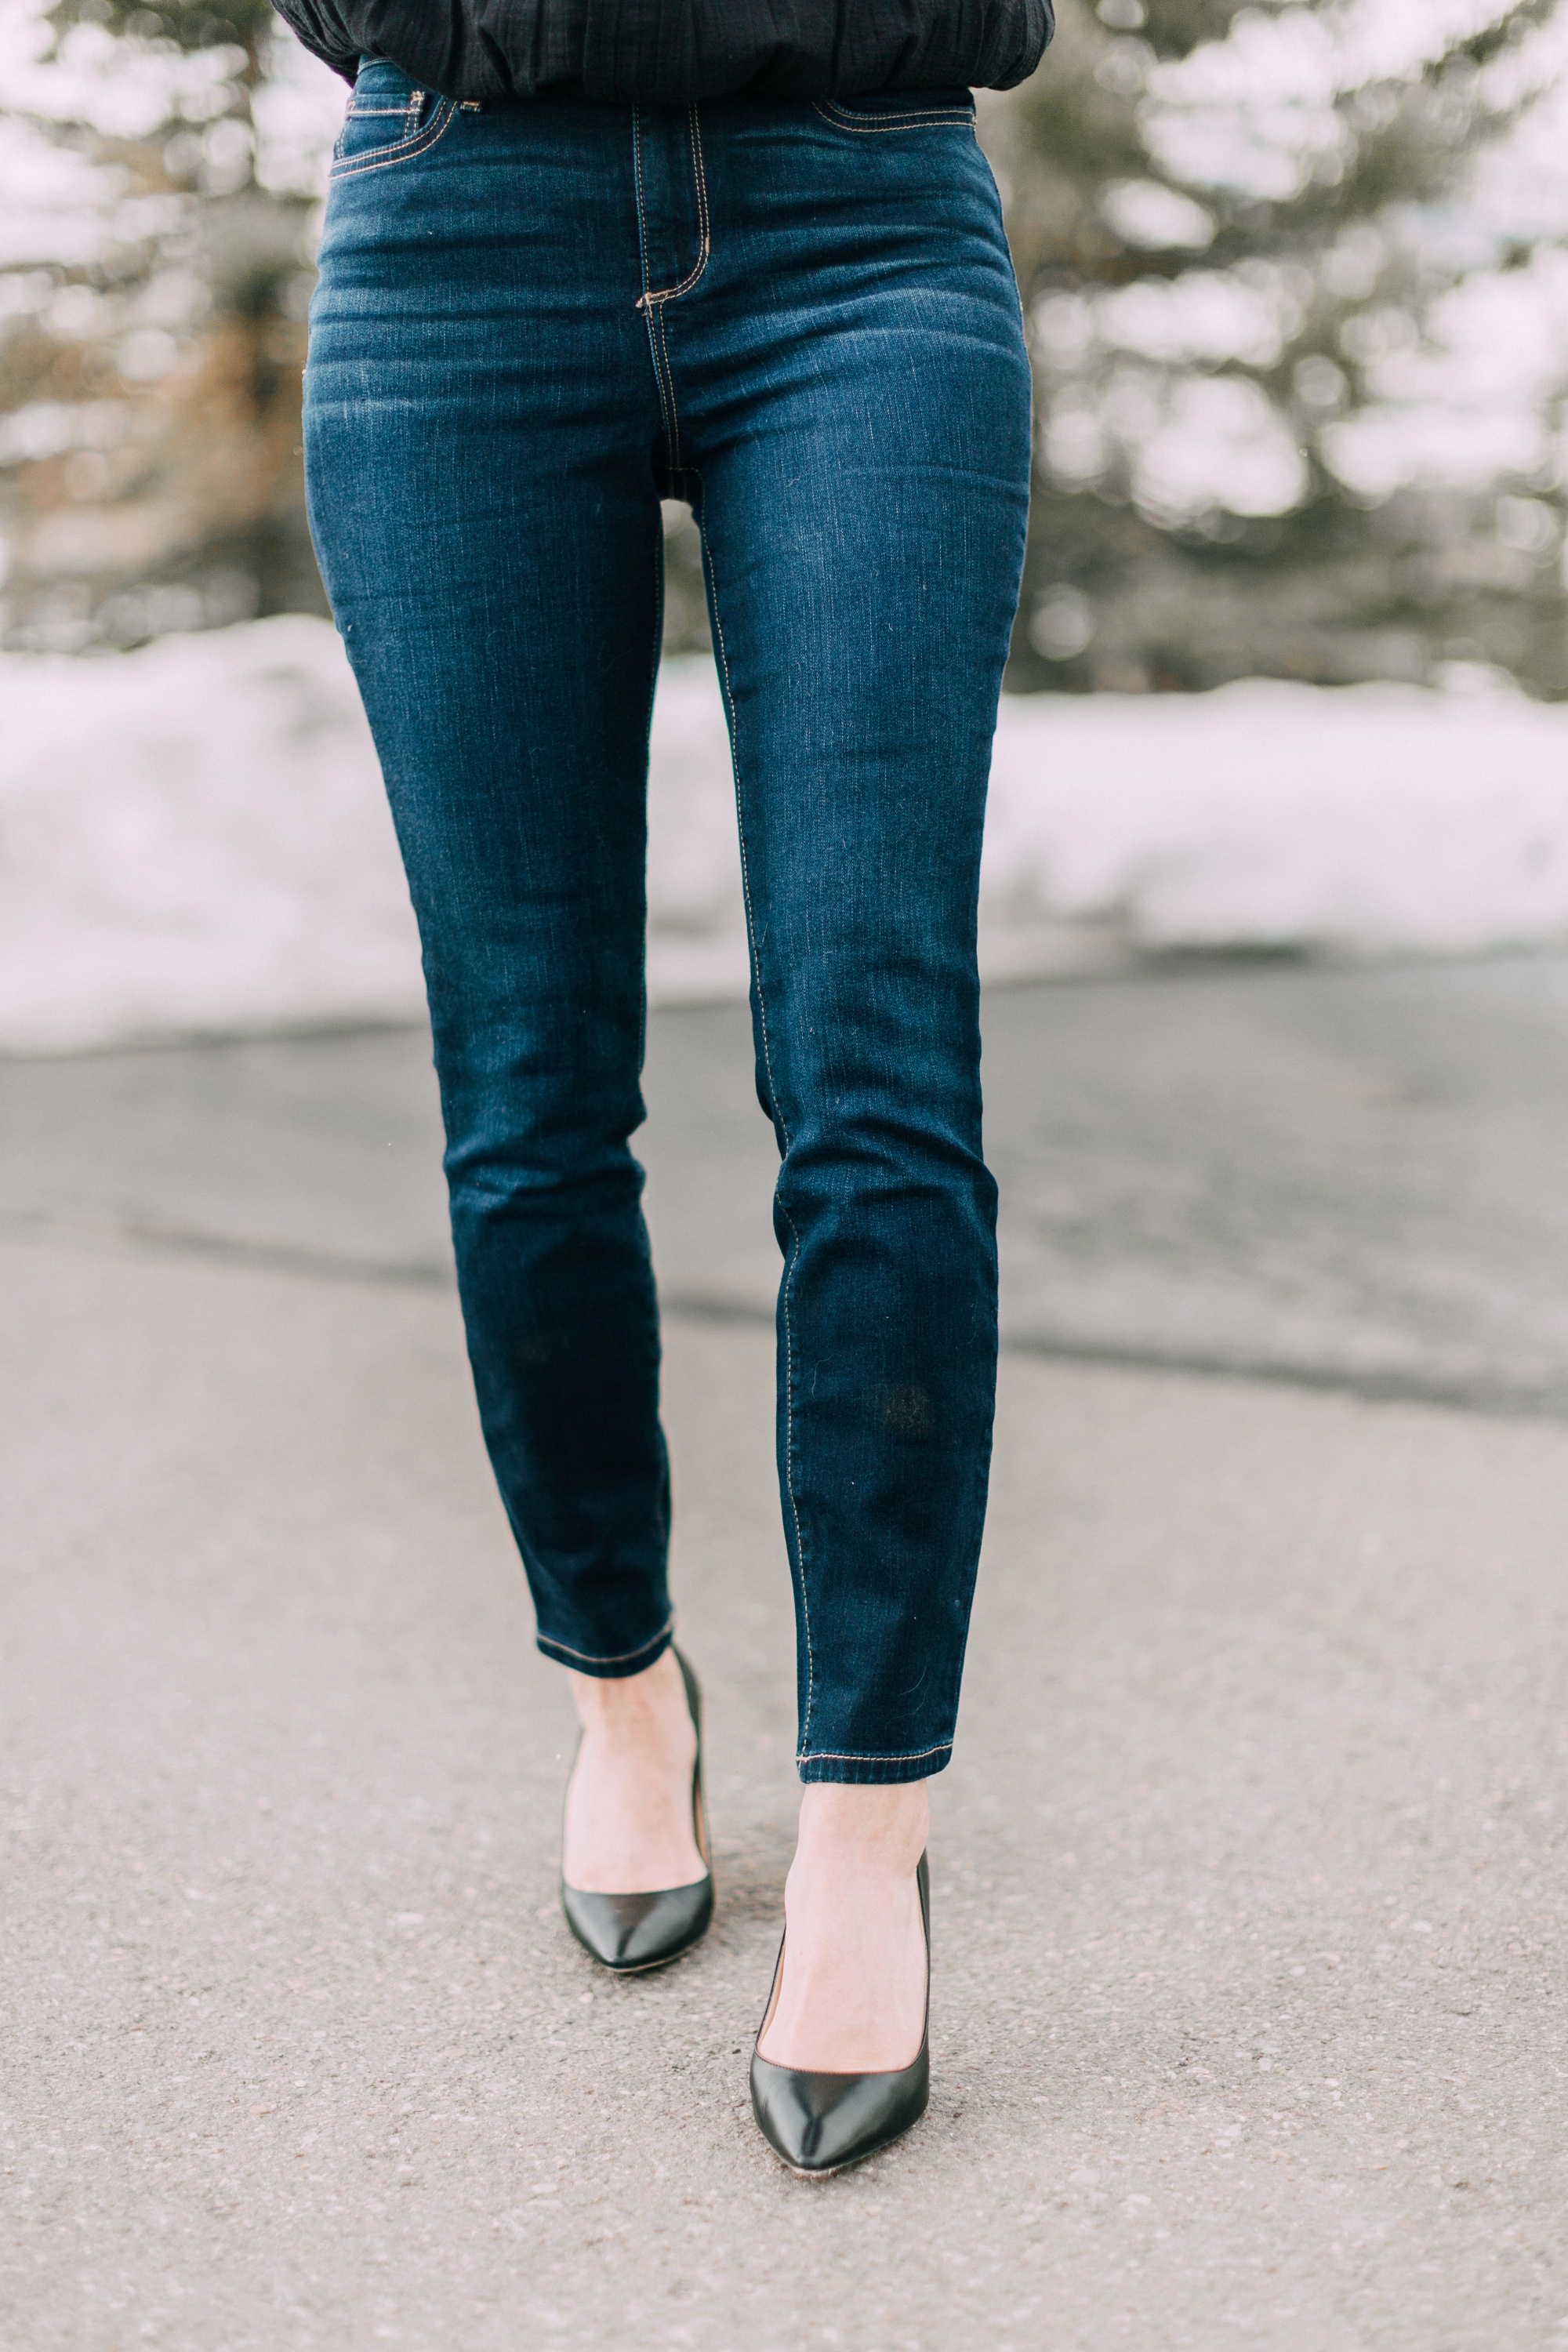 Fashion blogger Erin Busbee wearing dark wash skinny jeans from the new Sofia Vergara line at Walmart with black pumps